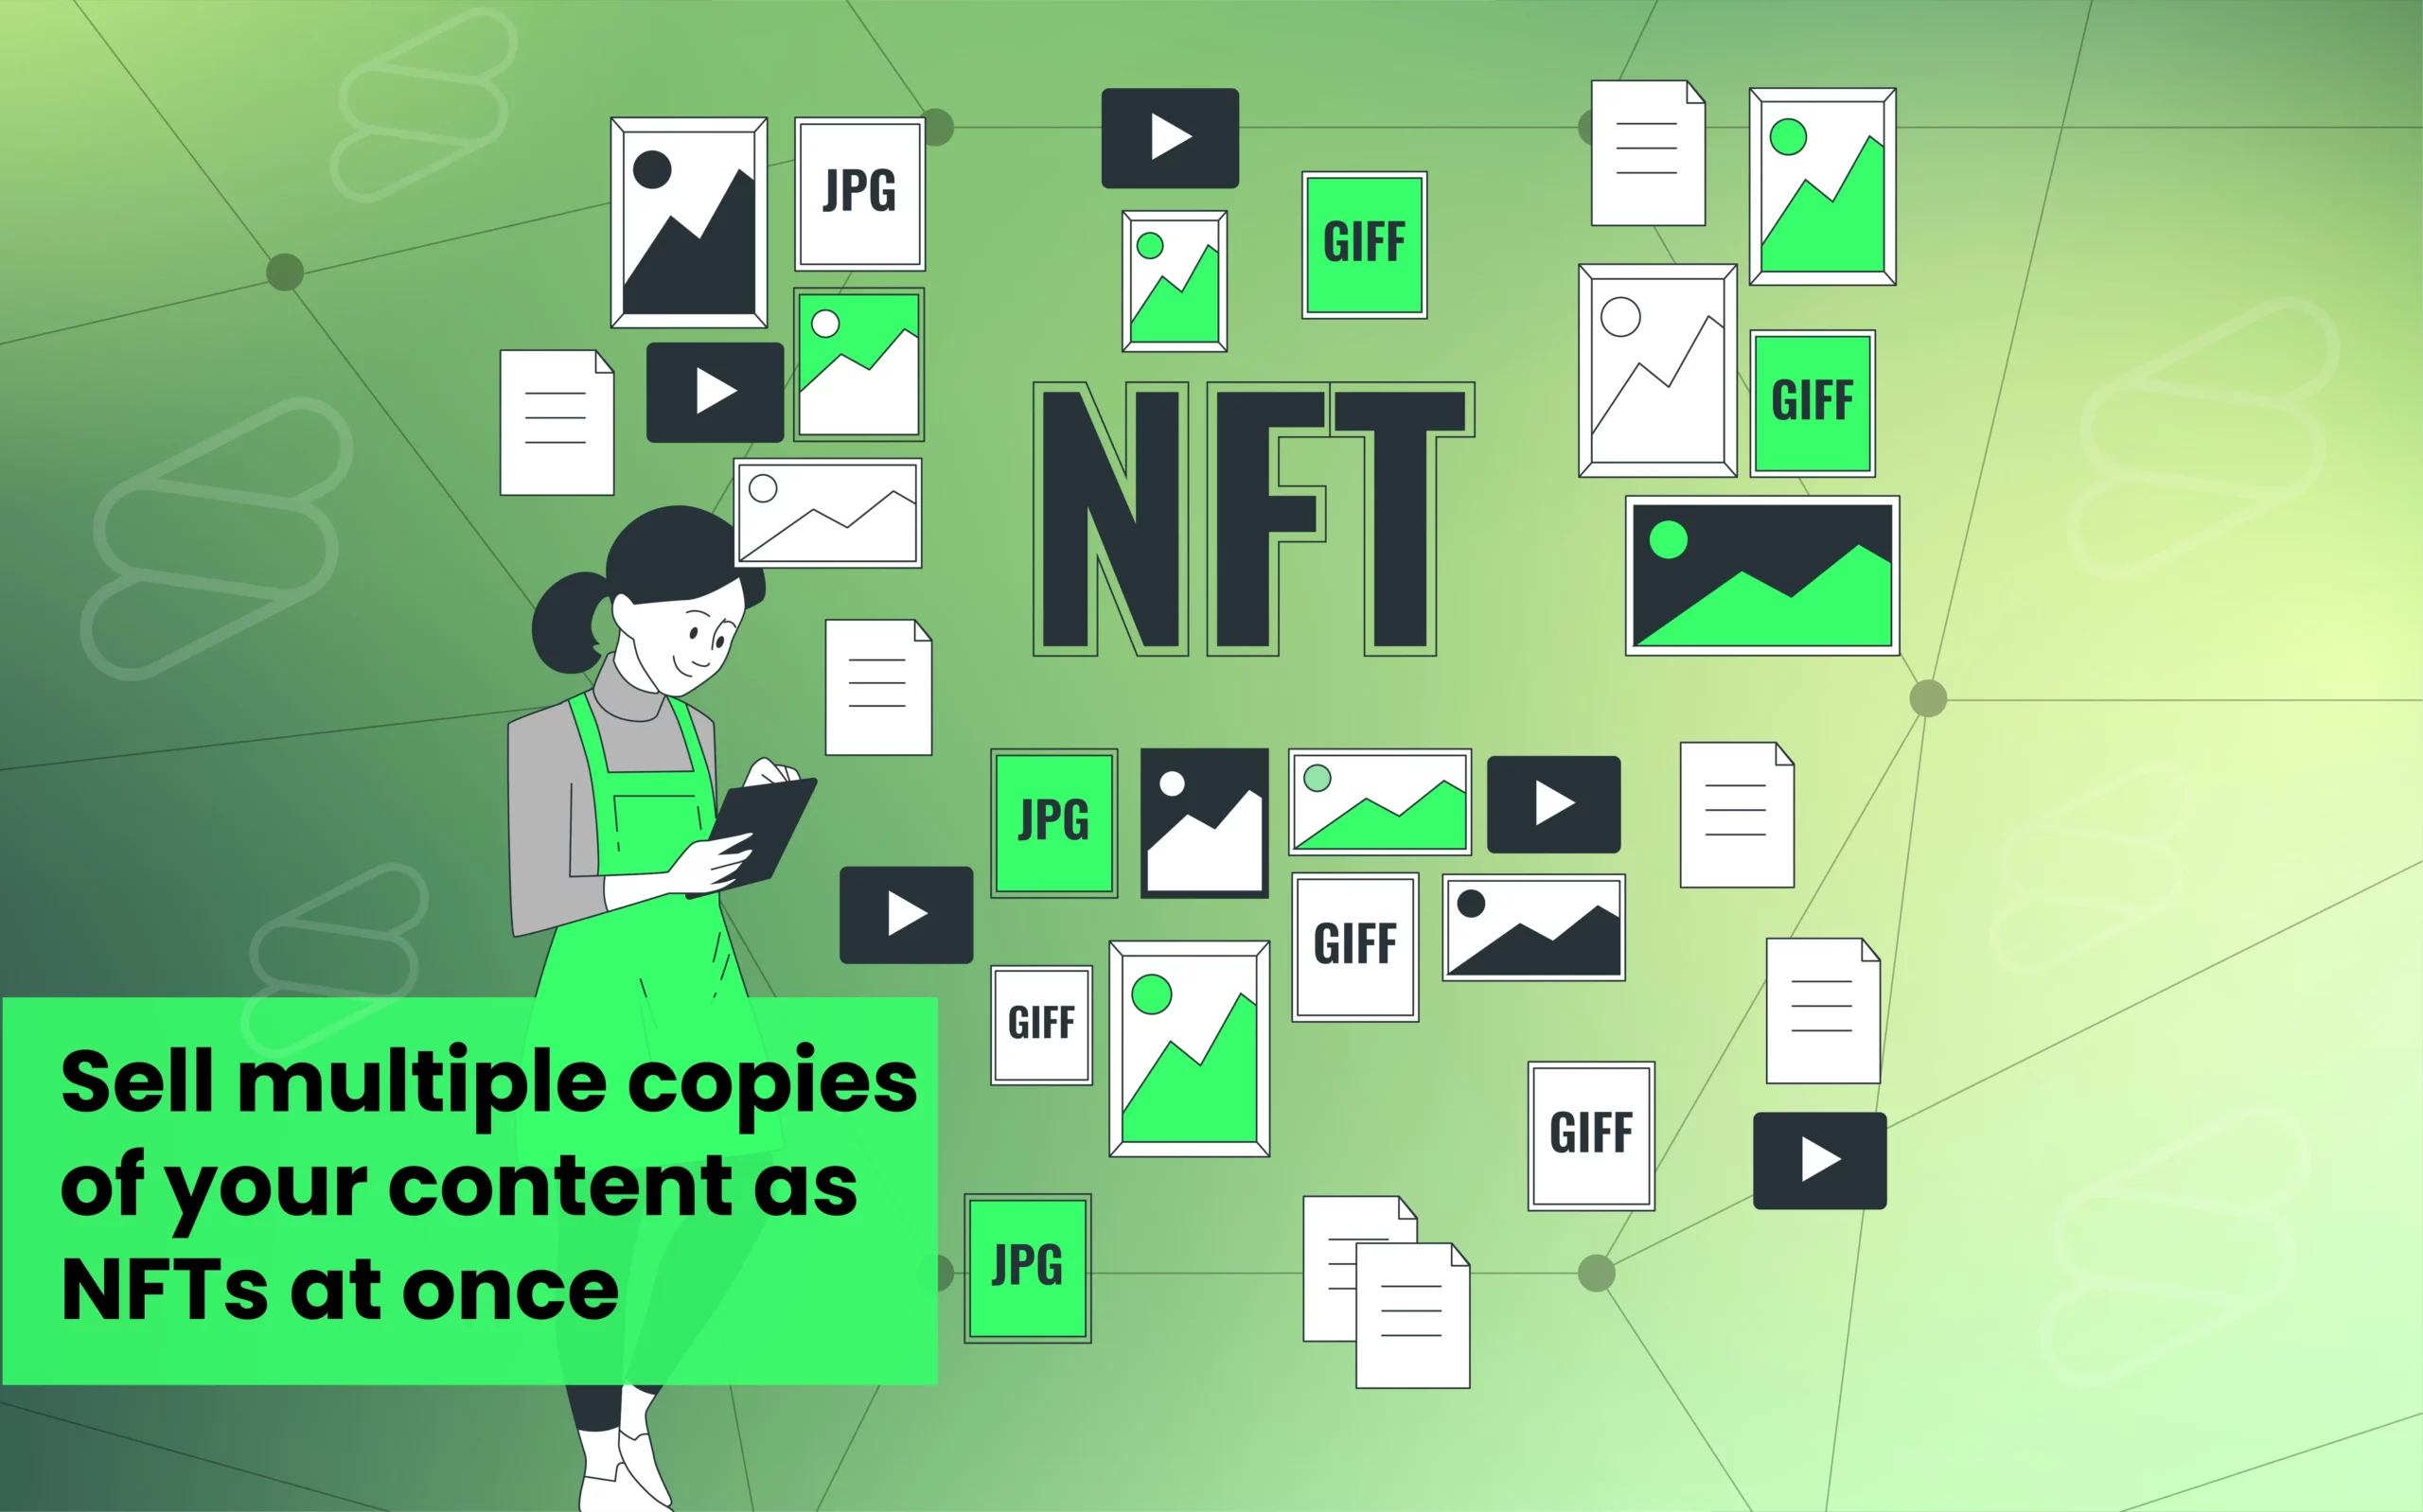 Sell multiple copies of your content as NFTs at once